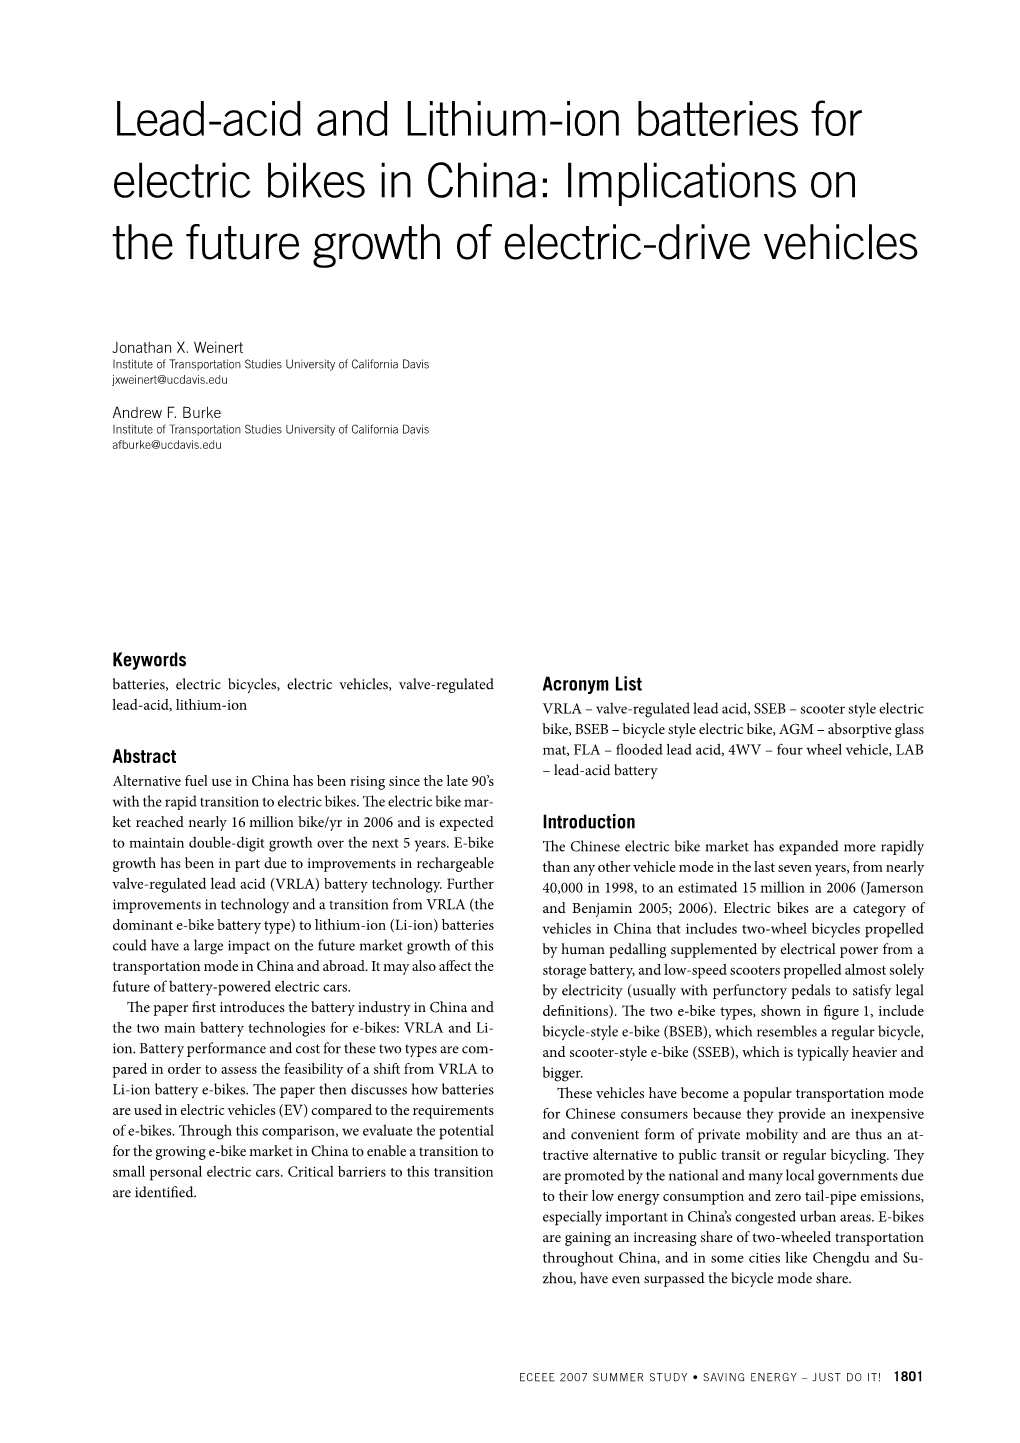 Lead-Acid and Lithium-Ion Batteries for Electric Bikes in China: Implications on the Future Growth of Electric-Drive Vehicles